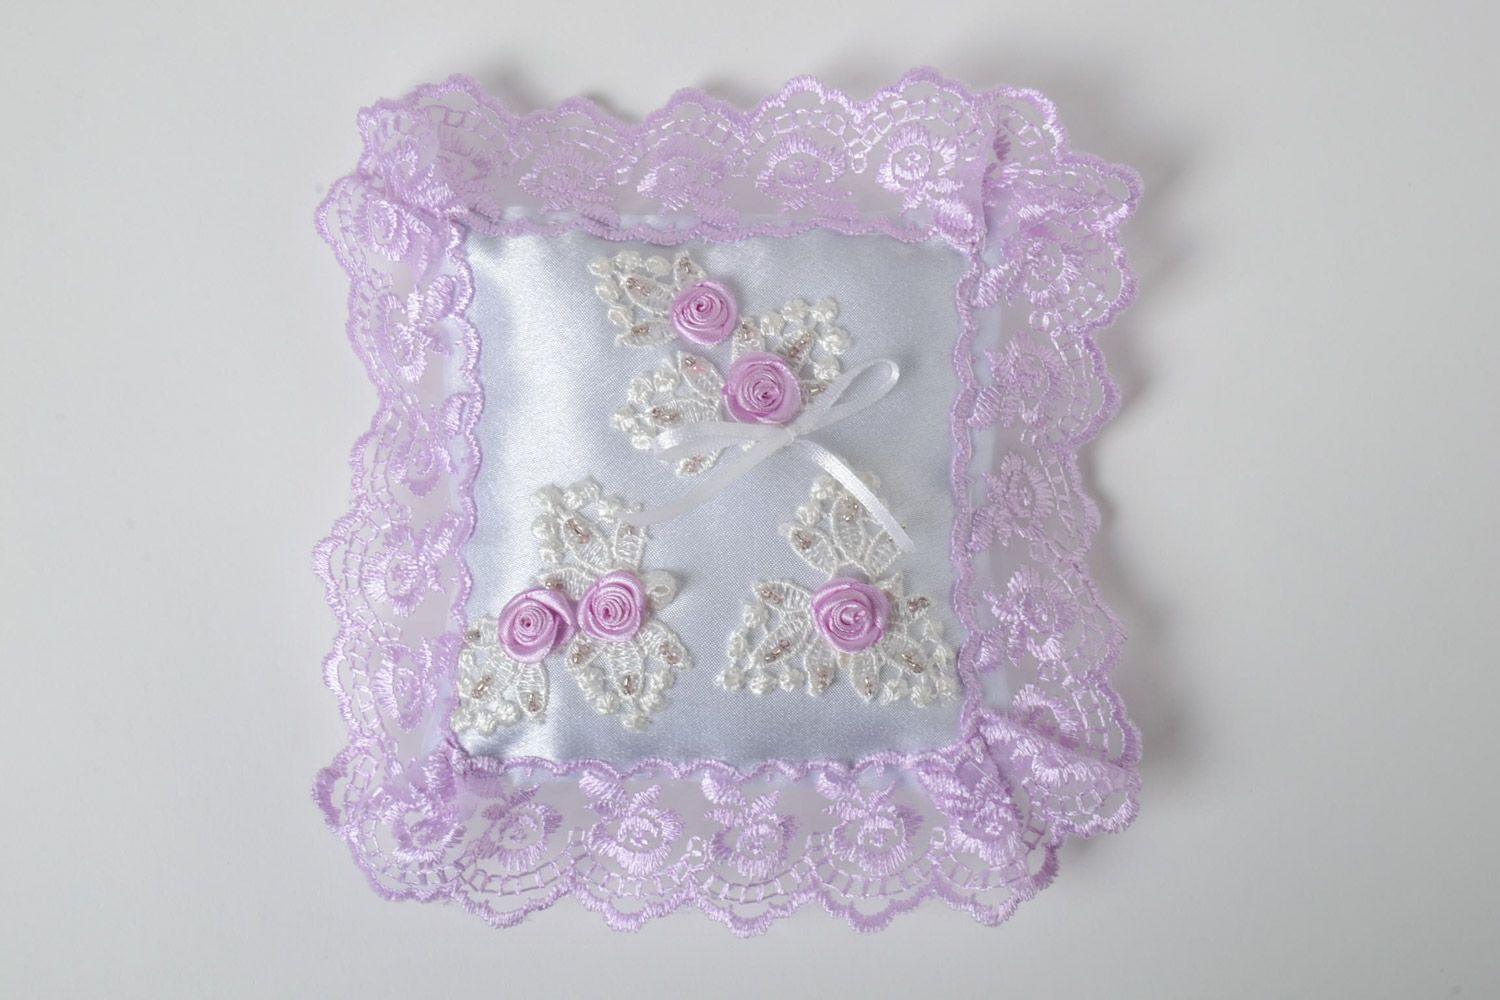 Handmade wedding rings pillow with lace and beads in white and lavender colors photo 2